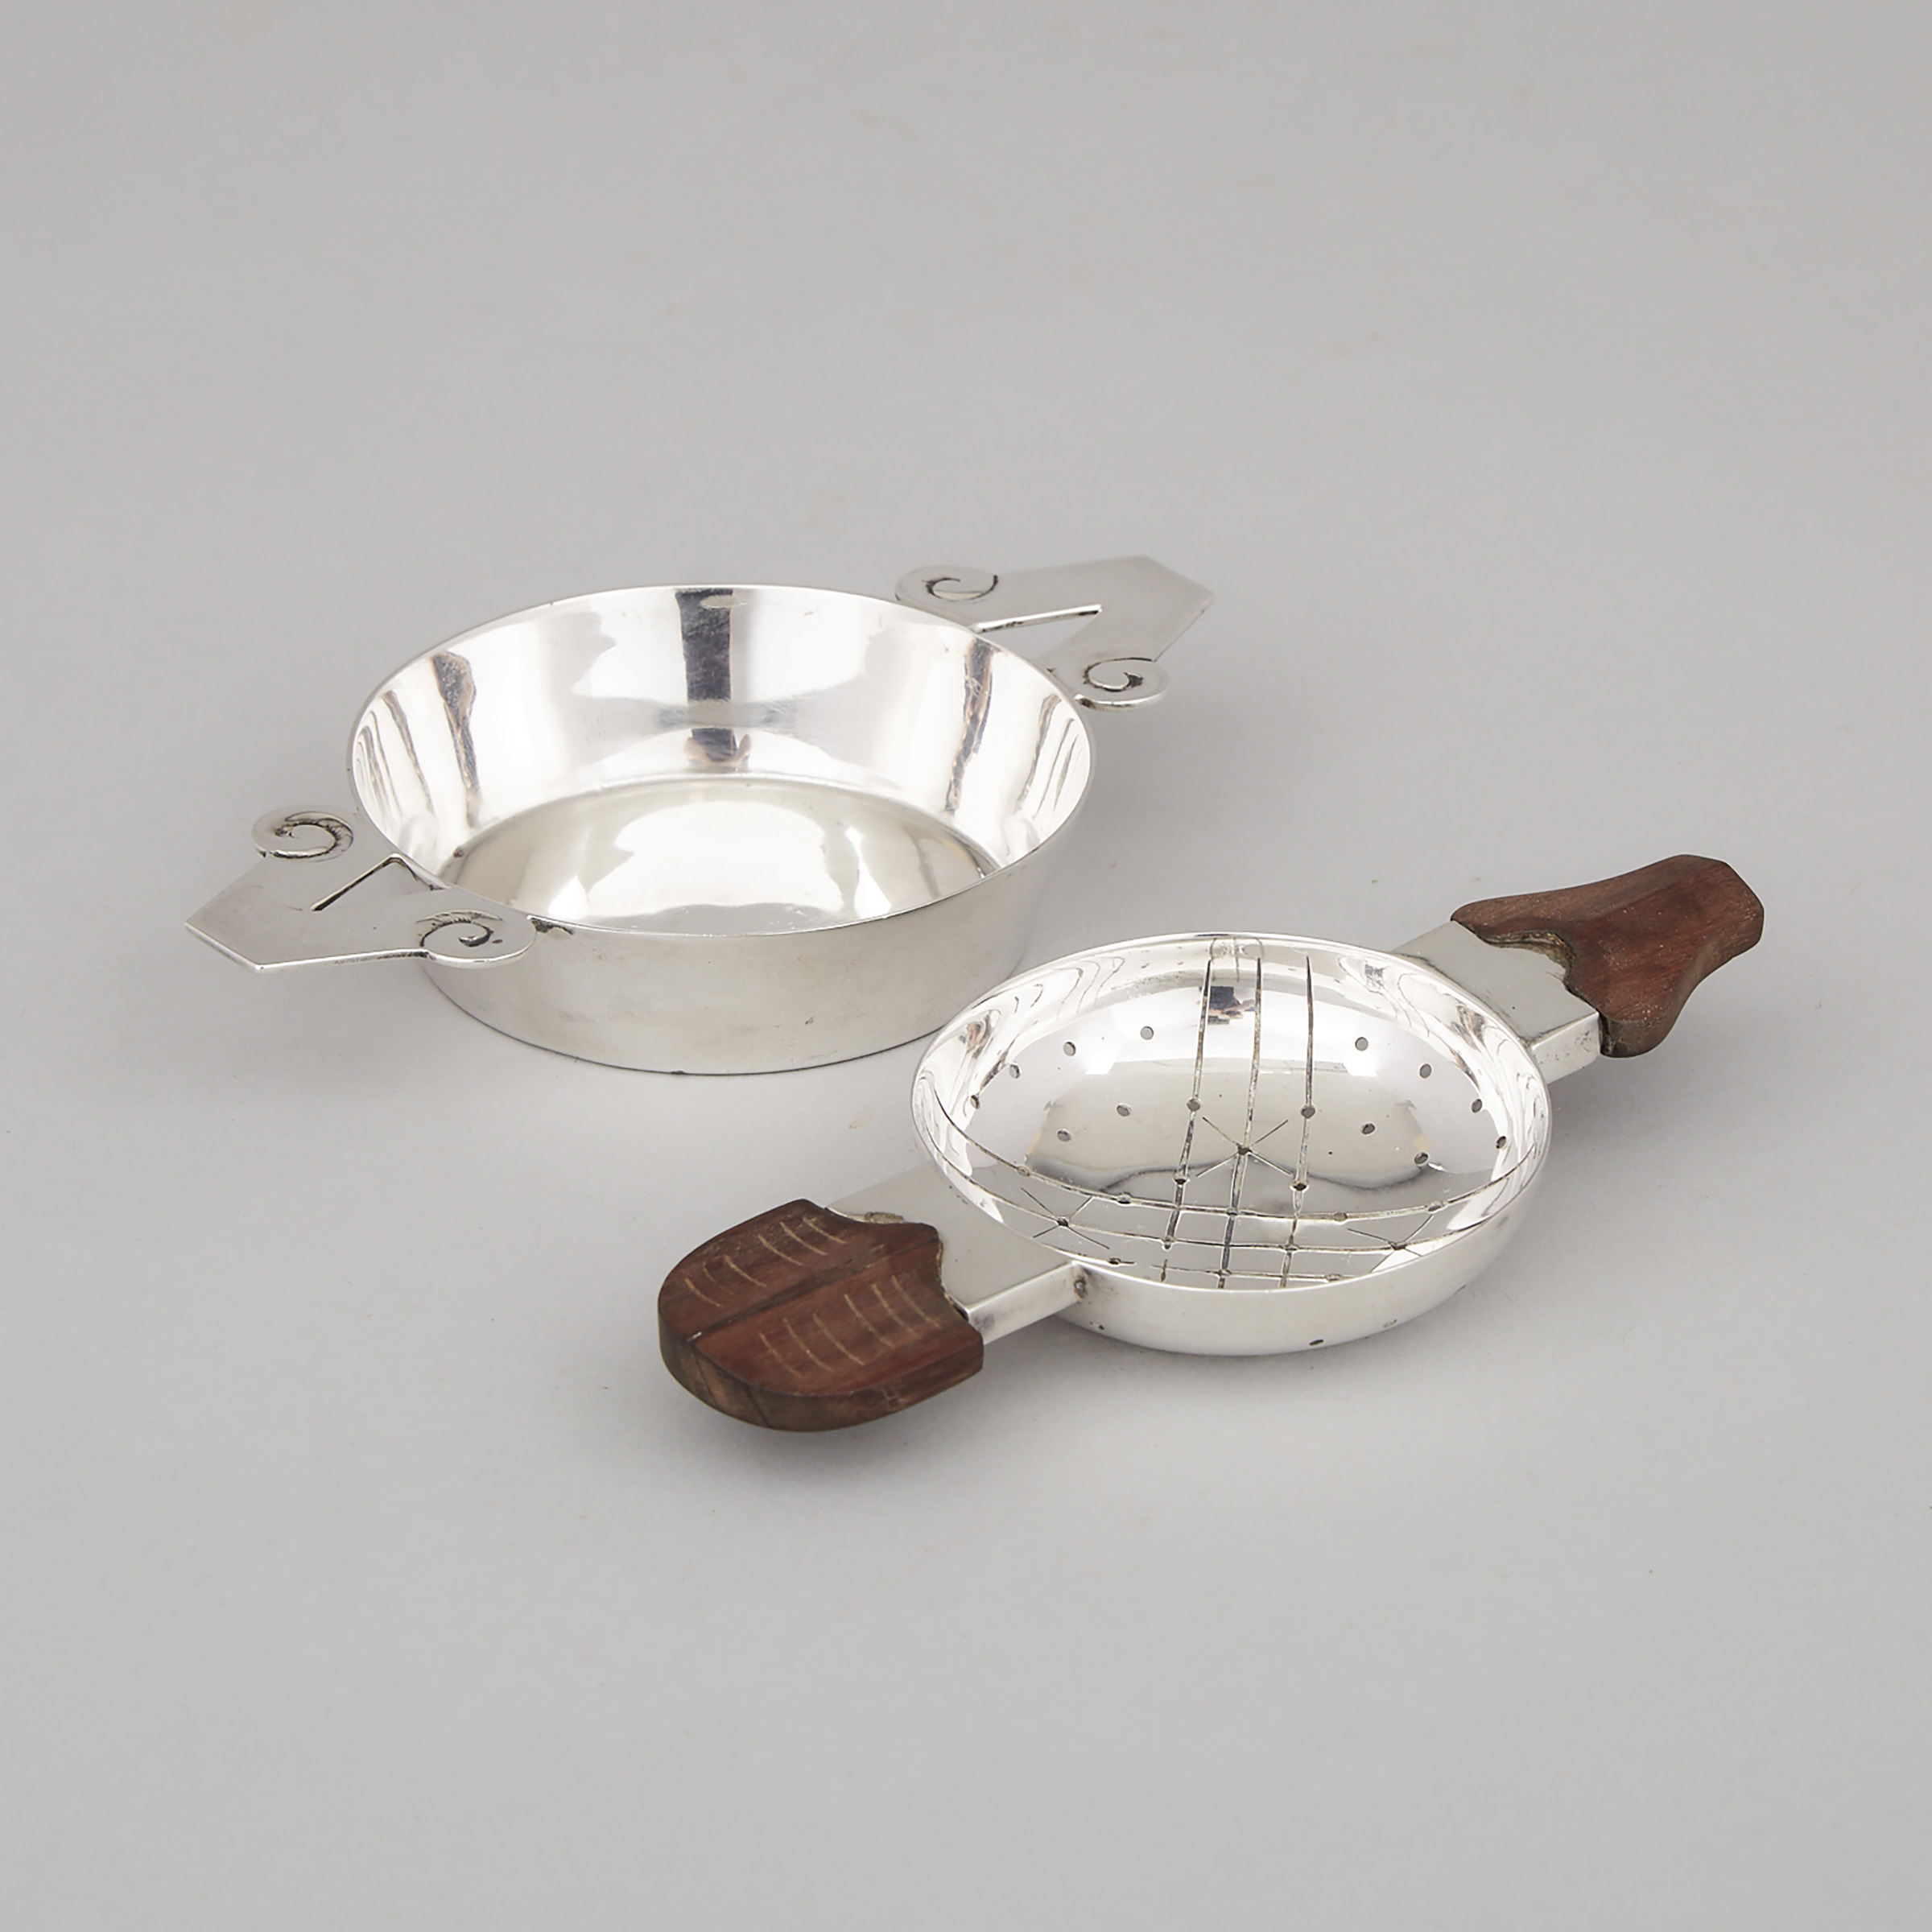 Mexican Silver Tea Strainer and Stand, William Spratling, Taxco, mid-20th century